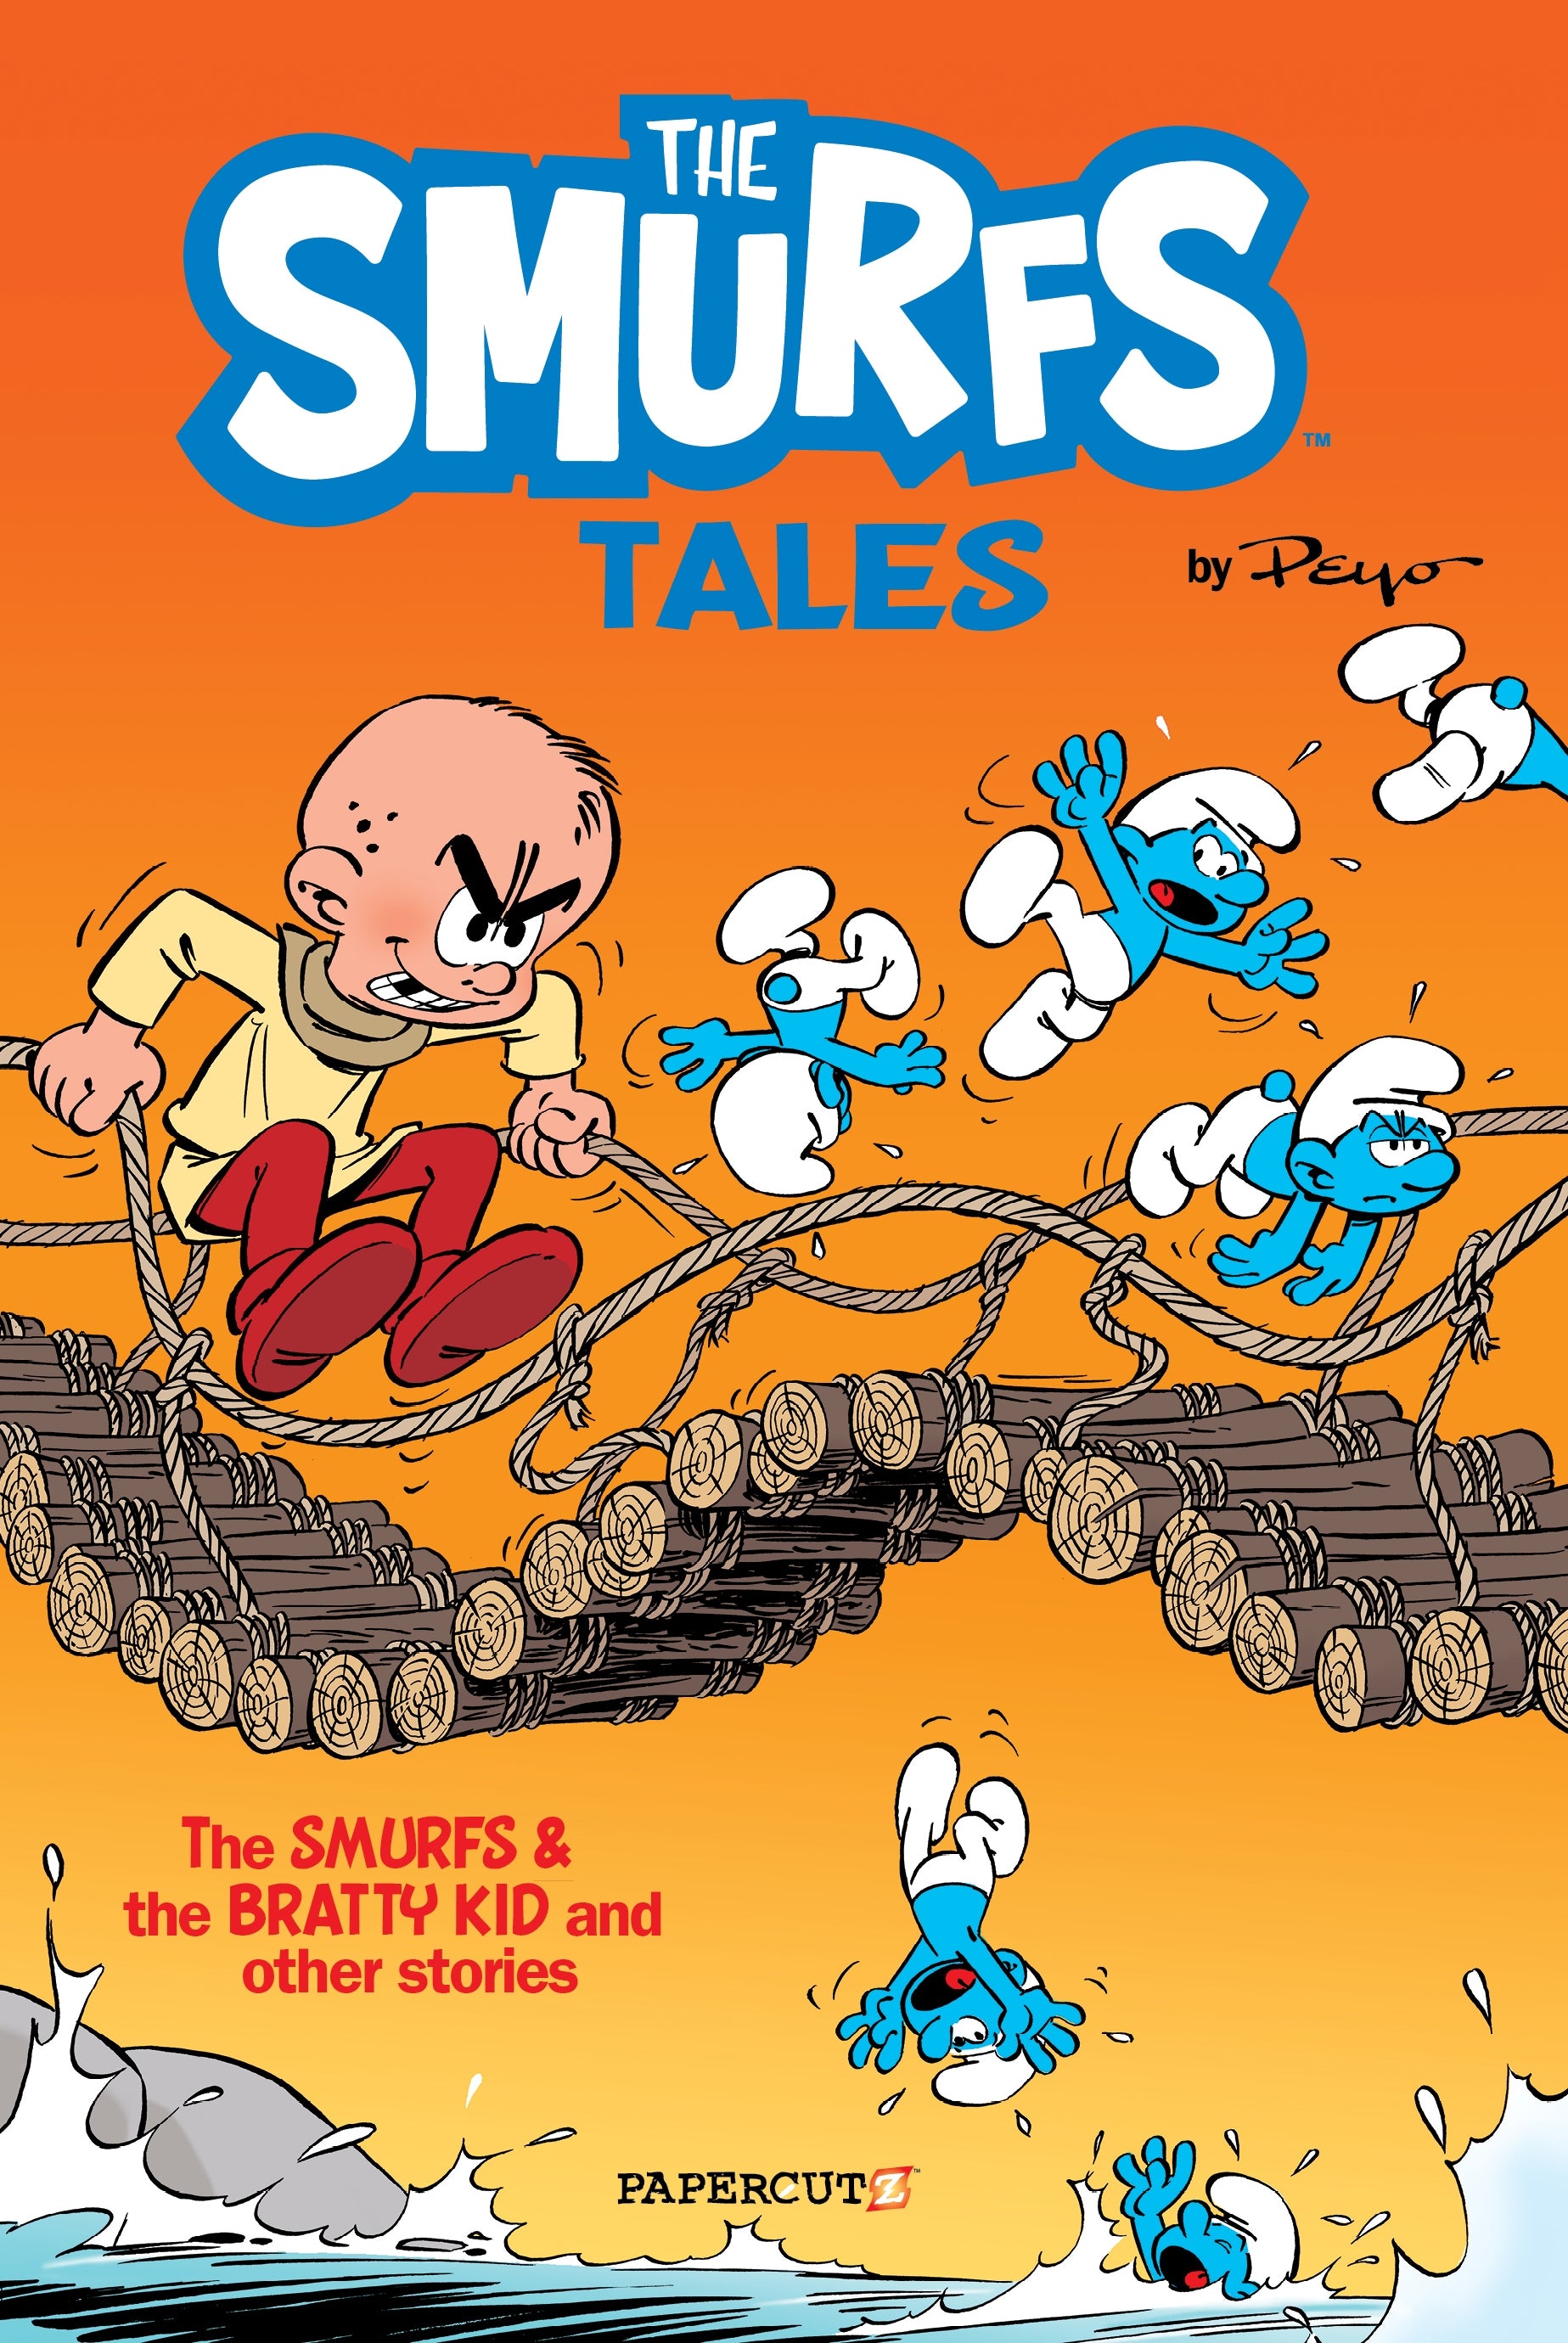 SMURF TALES TRADE PAPERBACK VOL 01 THE SMURFS & THE BRATTY KID & OTHER STORIES